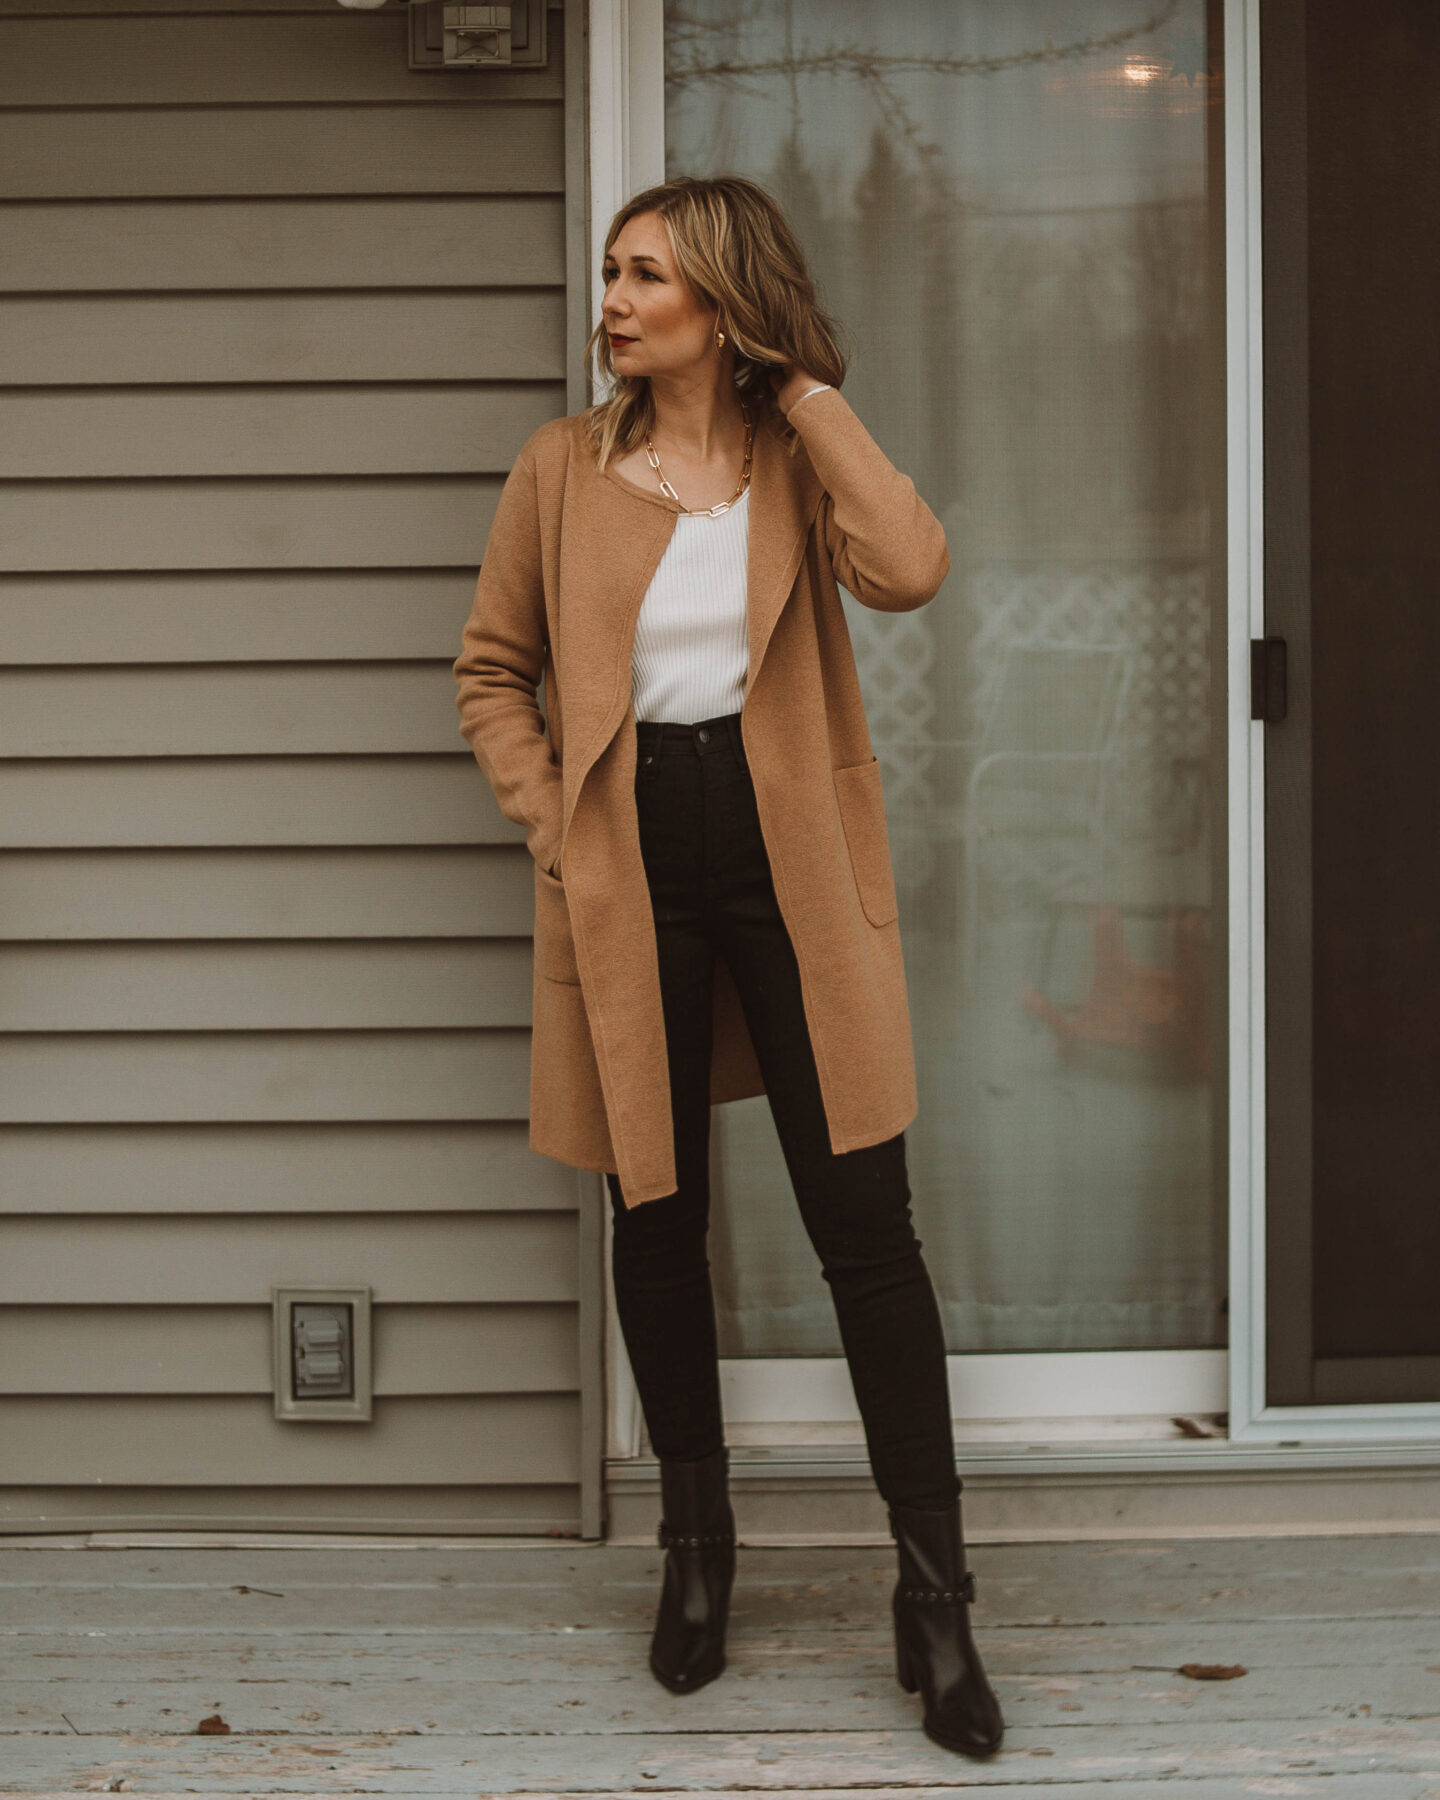 cozy at home christmas outfit ideas, black skinny jeans, camel cardigan, black heeled boots